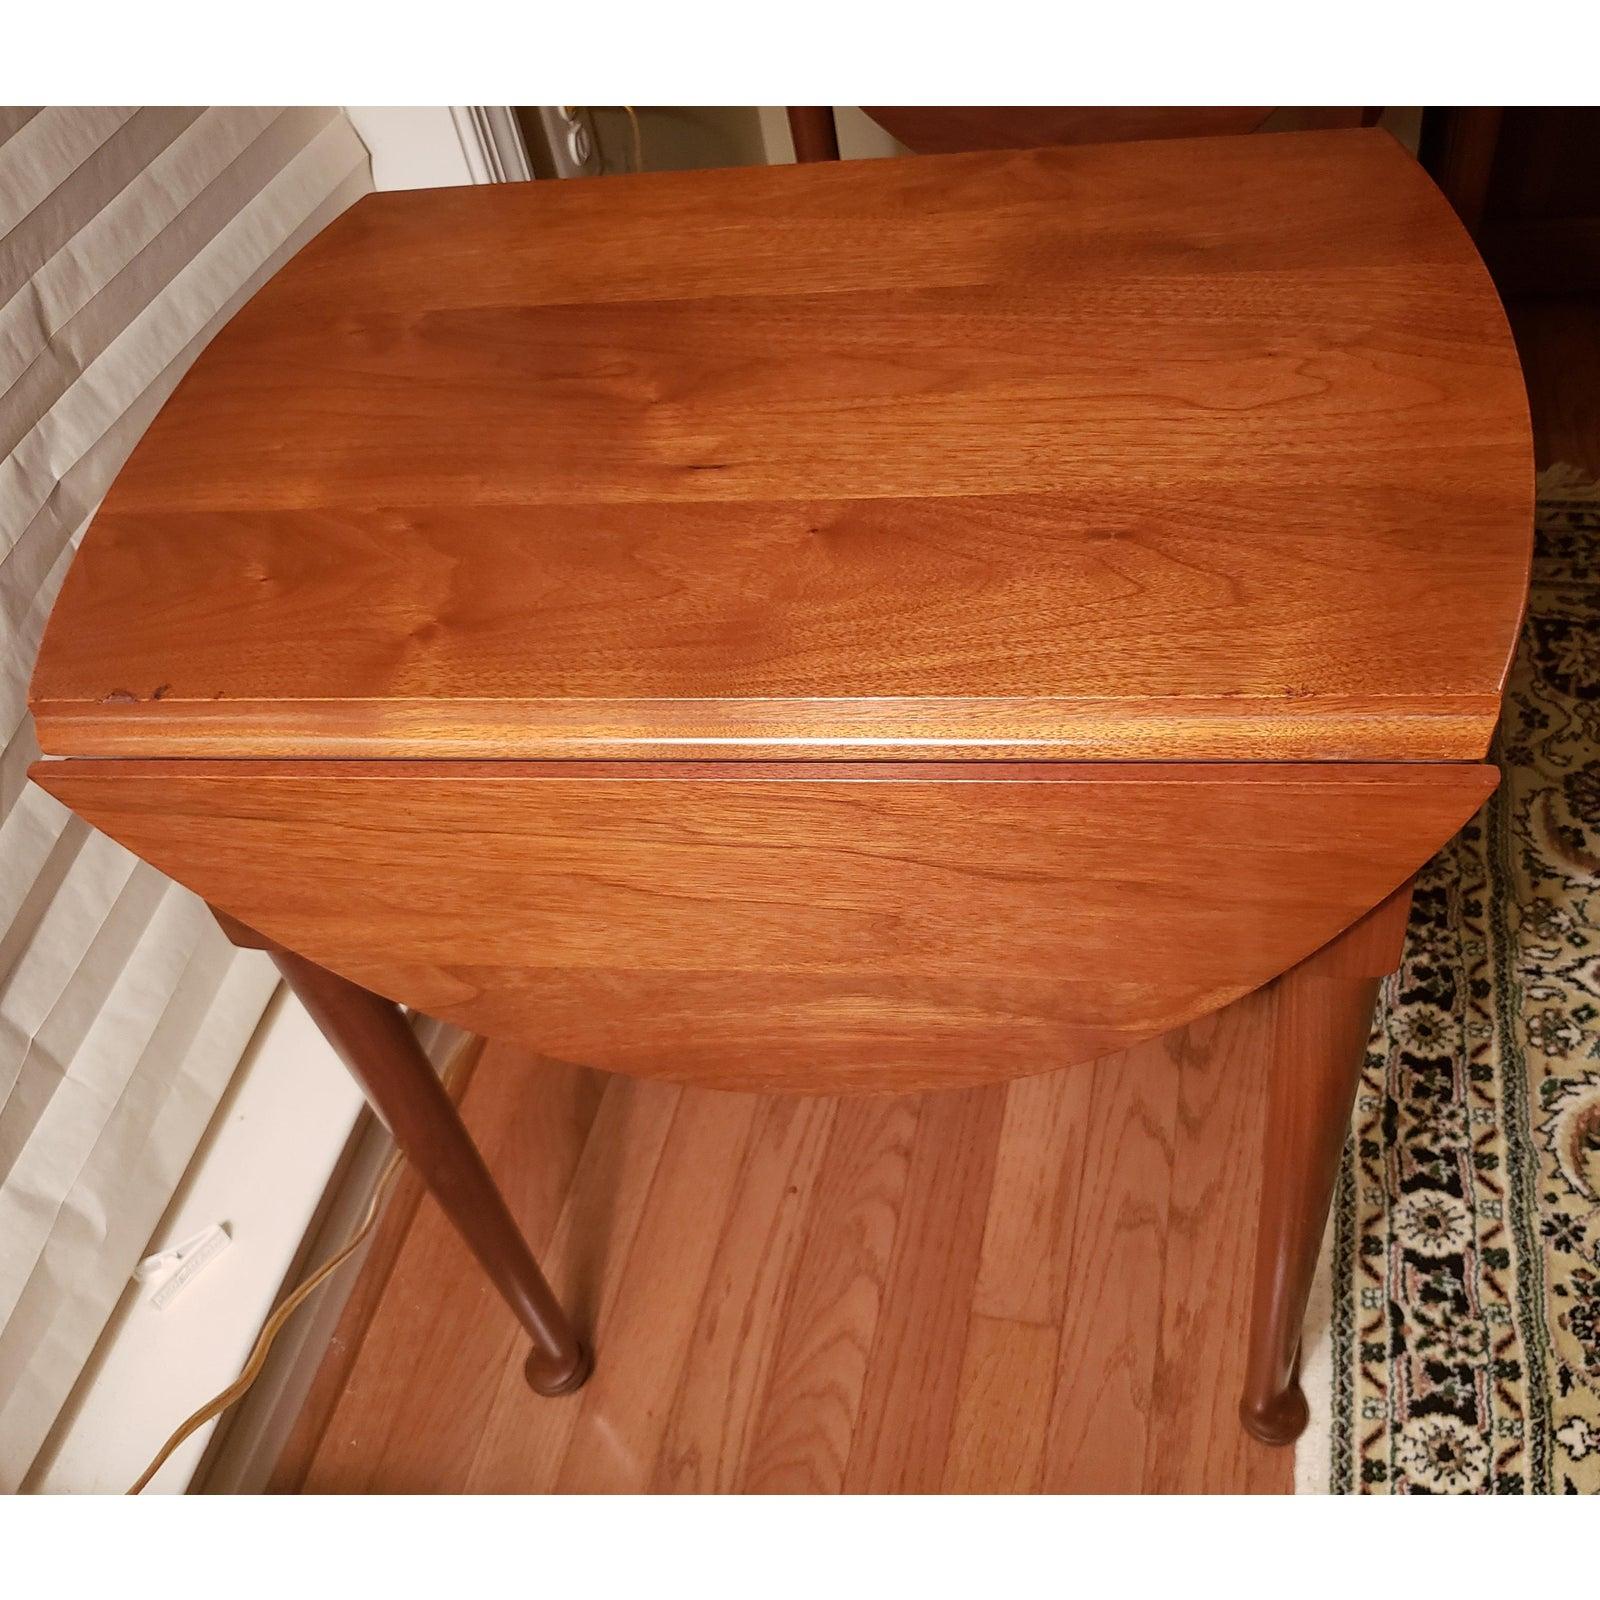 Woodwork 1970s Suters Hepplewhite Pembroke Drop-Leaves Oval Cherry Side Tables For Sale